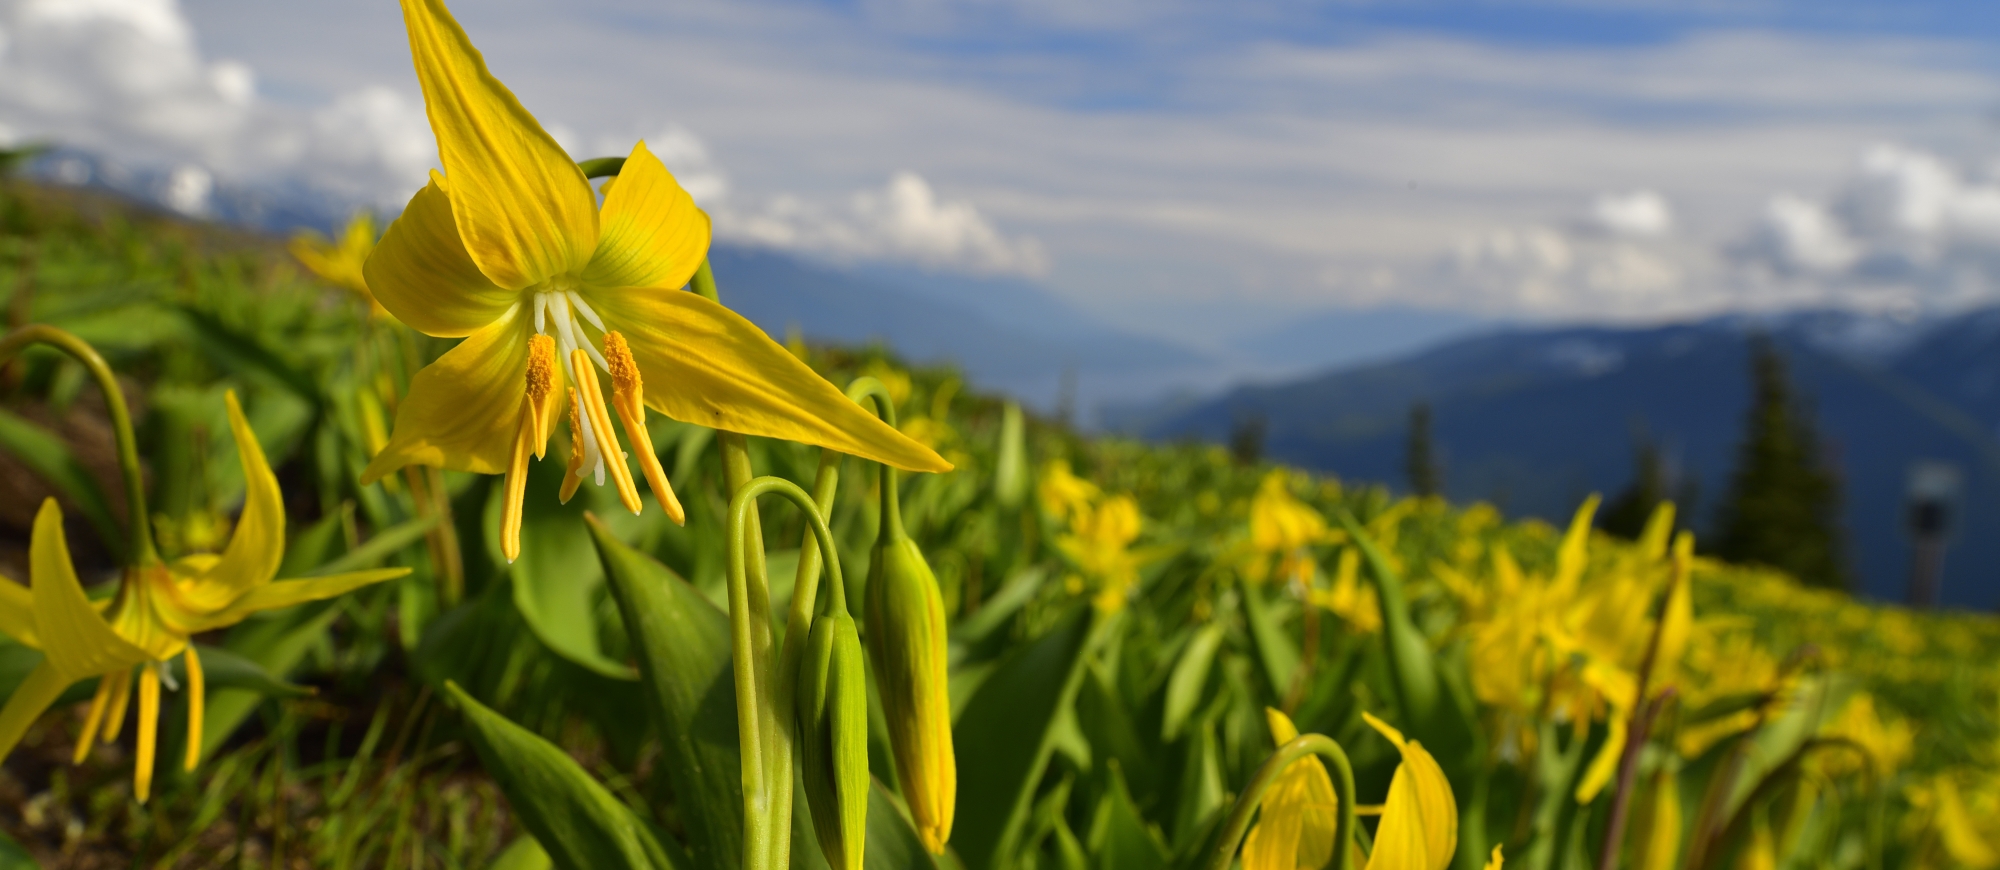 Yellow flowers blooming in a field in spring